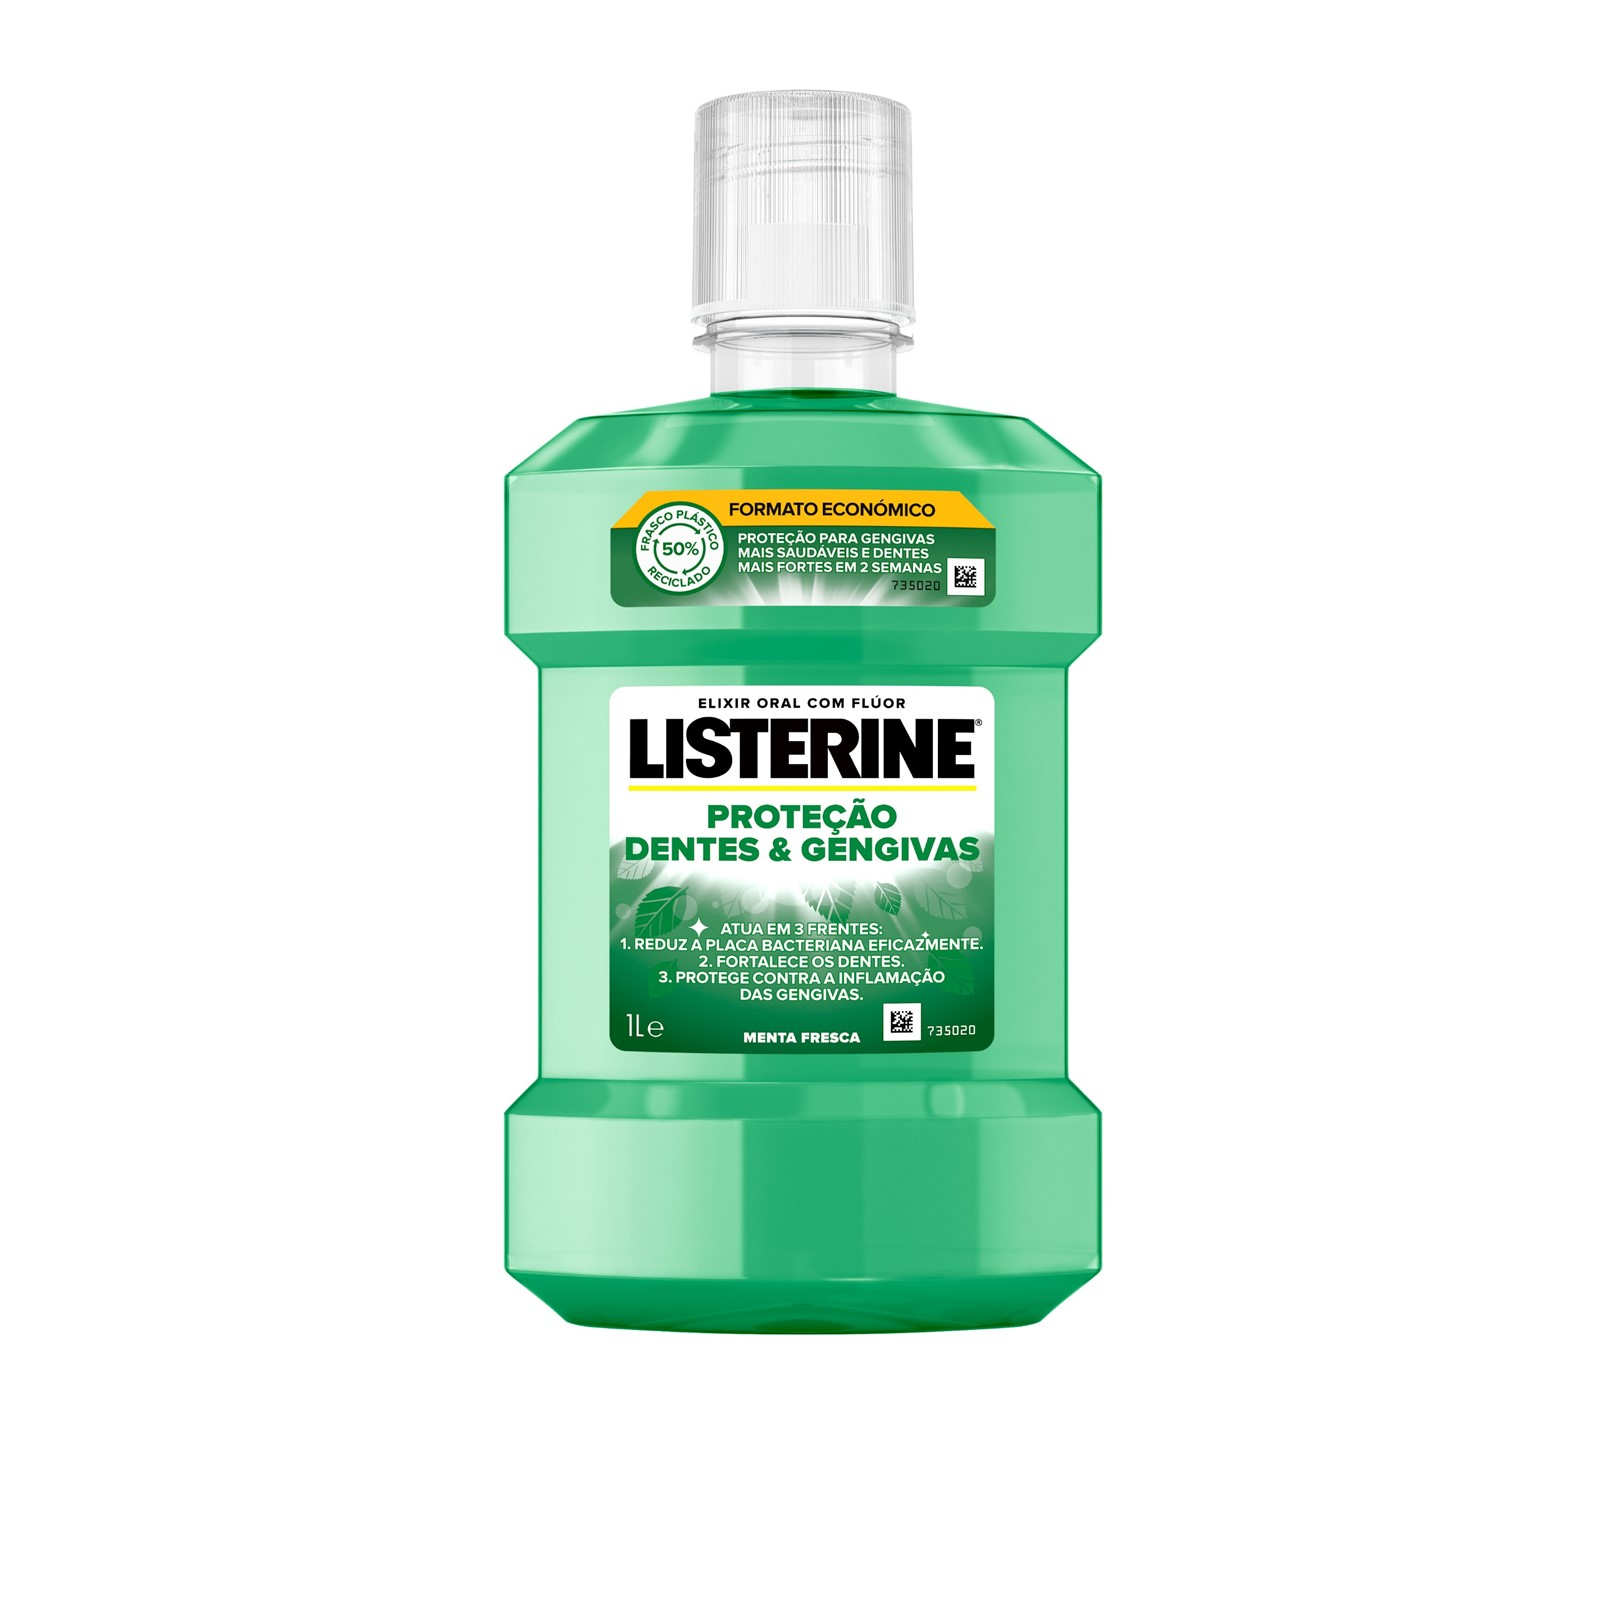 https://static.beautytocare.com/media/catalog/product/l/i/listerine-teeth-and-gum-protection-mouthwash-1l.jpg